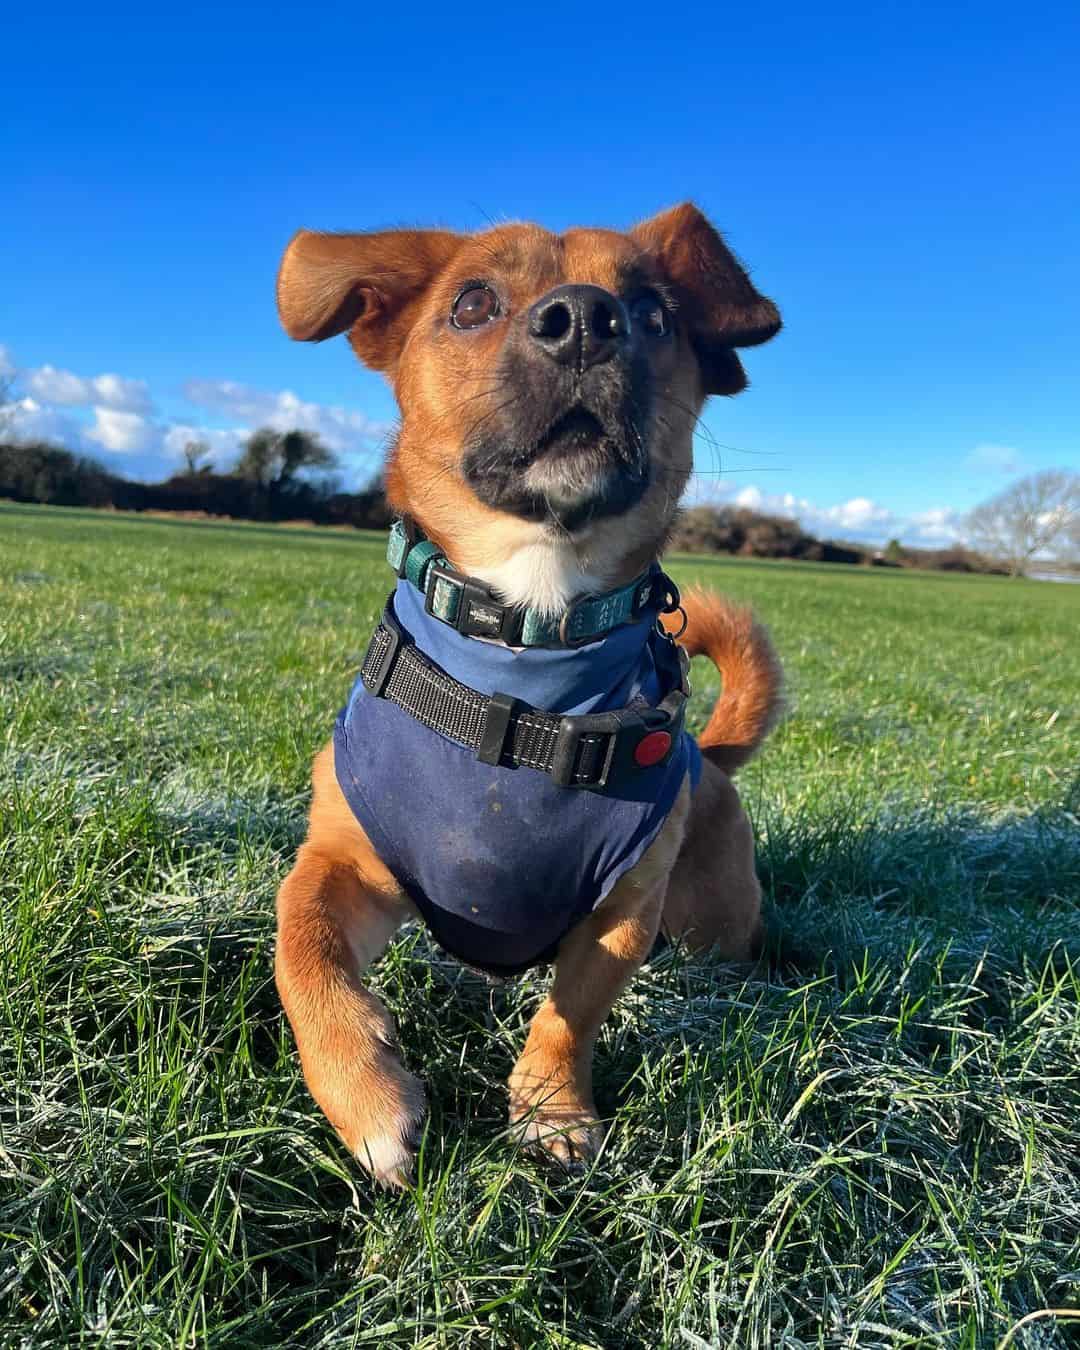 jack russell dachshund mix wearing a harness